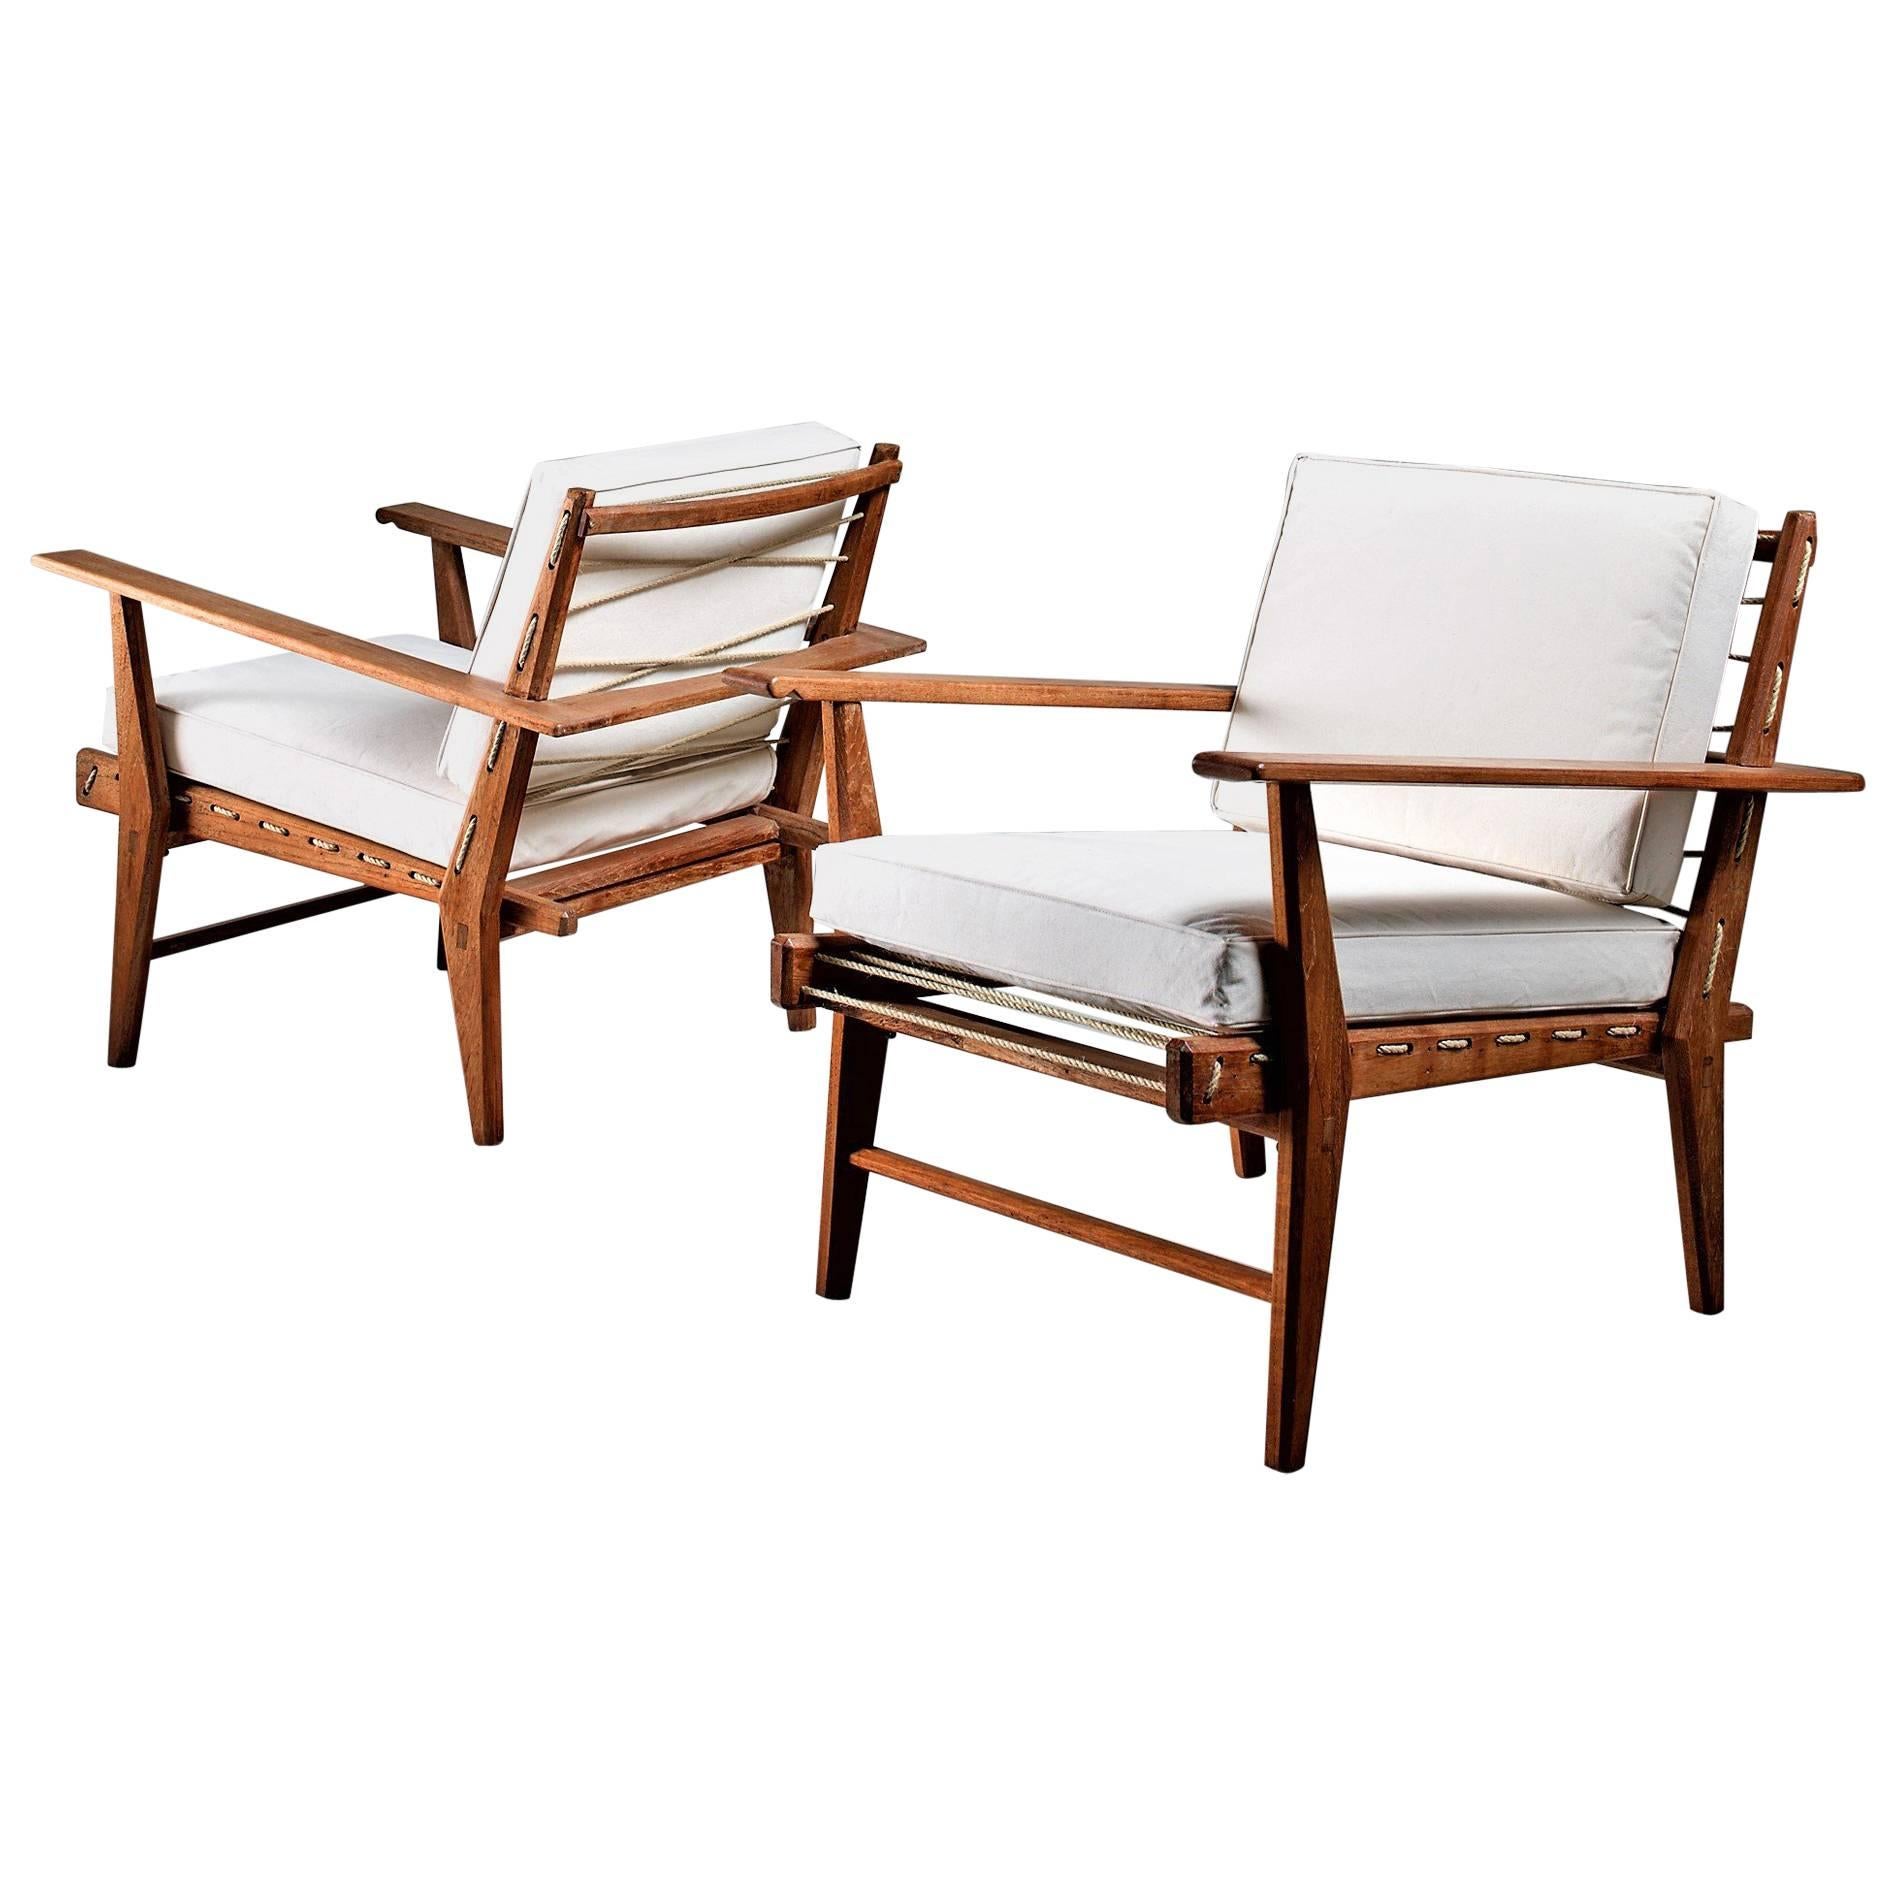 Pair of Italian 1950s Rope Chairs in Solid Teak with New White Canvas Upholstery